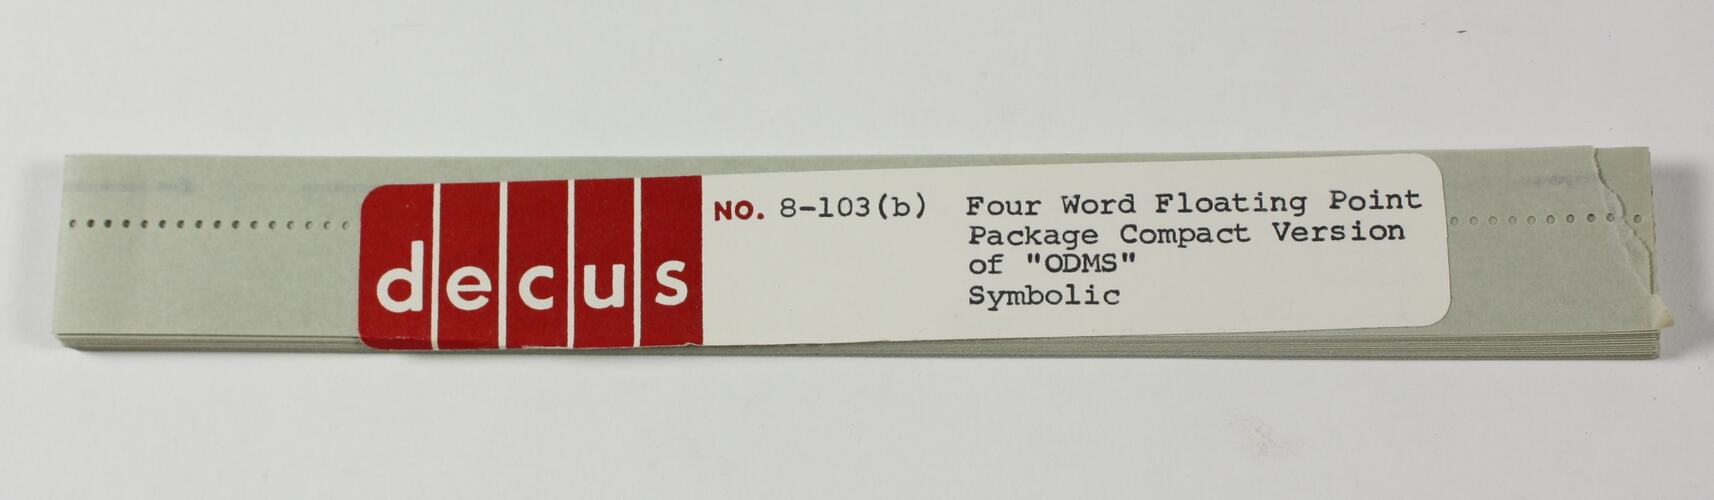 Paper Tape - DECUS, '8-103b Four Word Floating Point Package, Compact Version of ODMS, Symbolic'